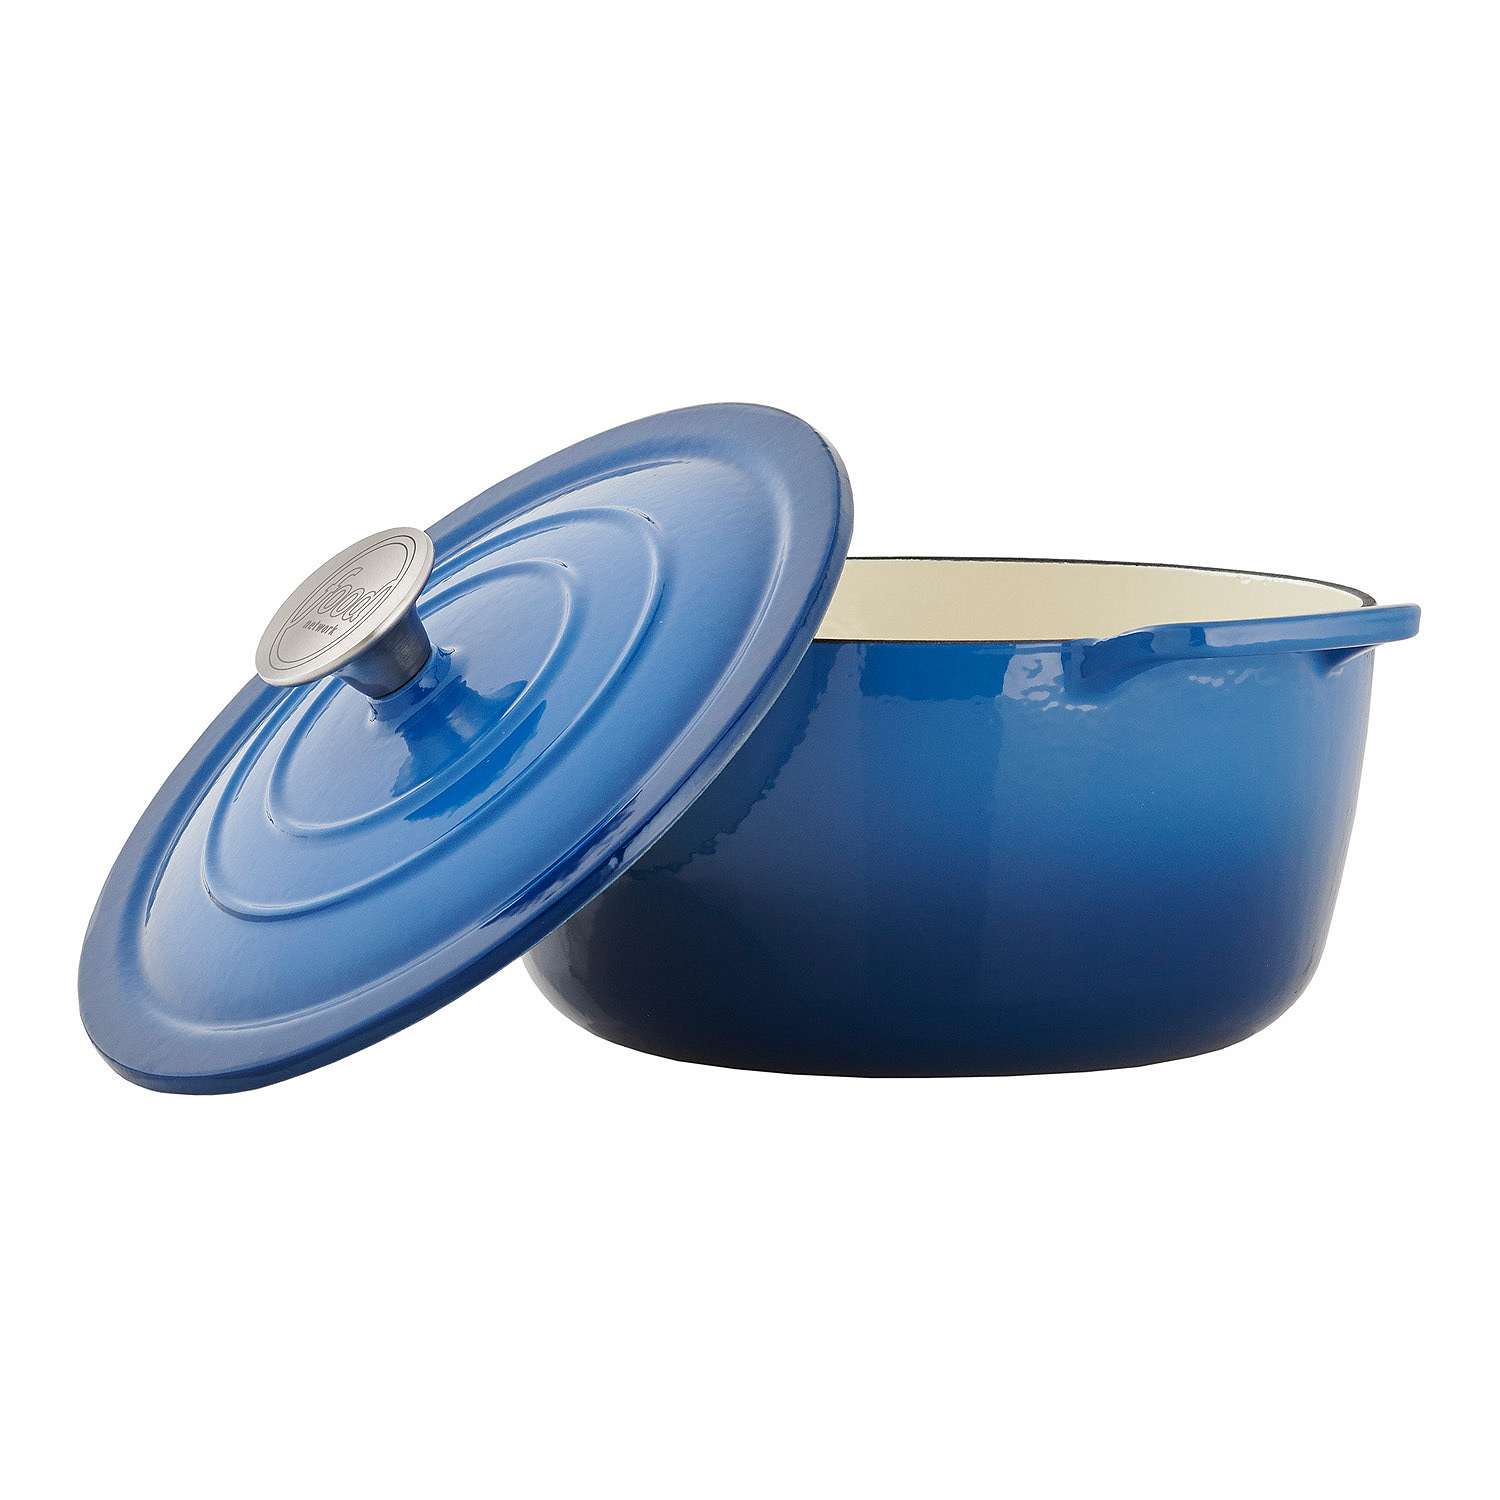 5-Quart Food Network Enameled Cast-Iron Dutch Oven $34, 3.5-Quart Dutch Oven or 5-Quart Sauteuse Pan $25.50 + Free Store Pickup at Kohl's or F/S on Orders $49+